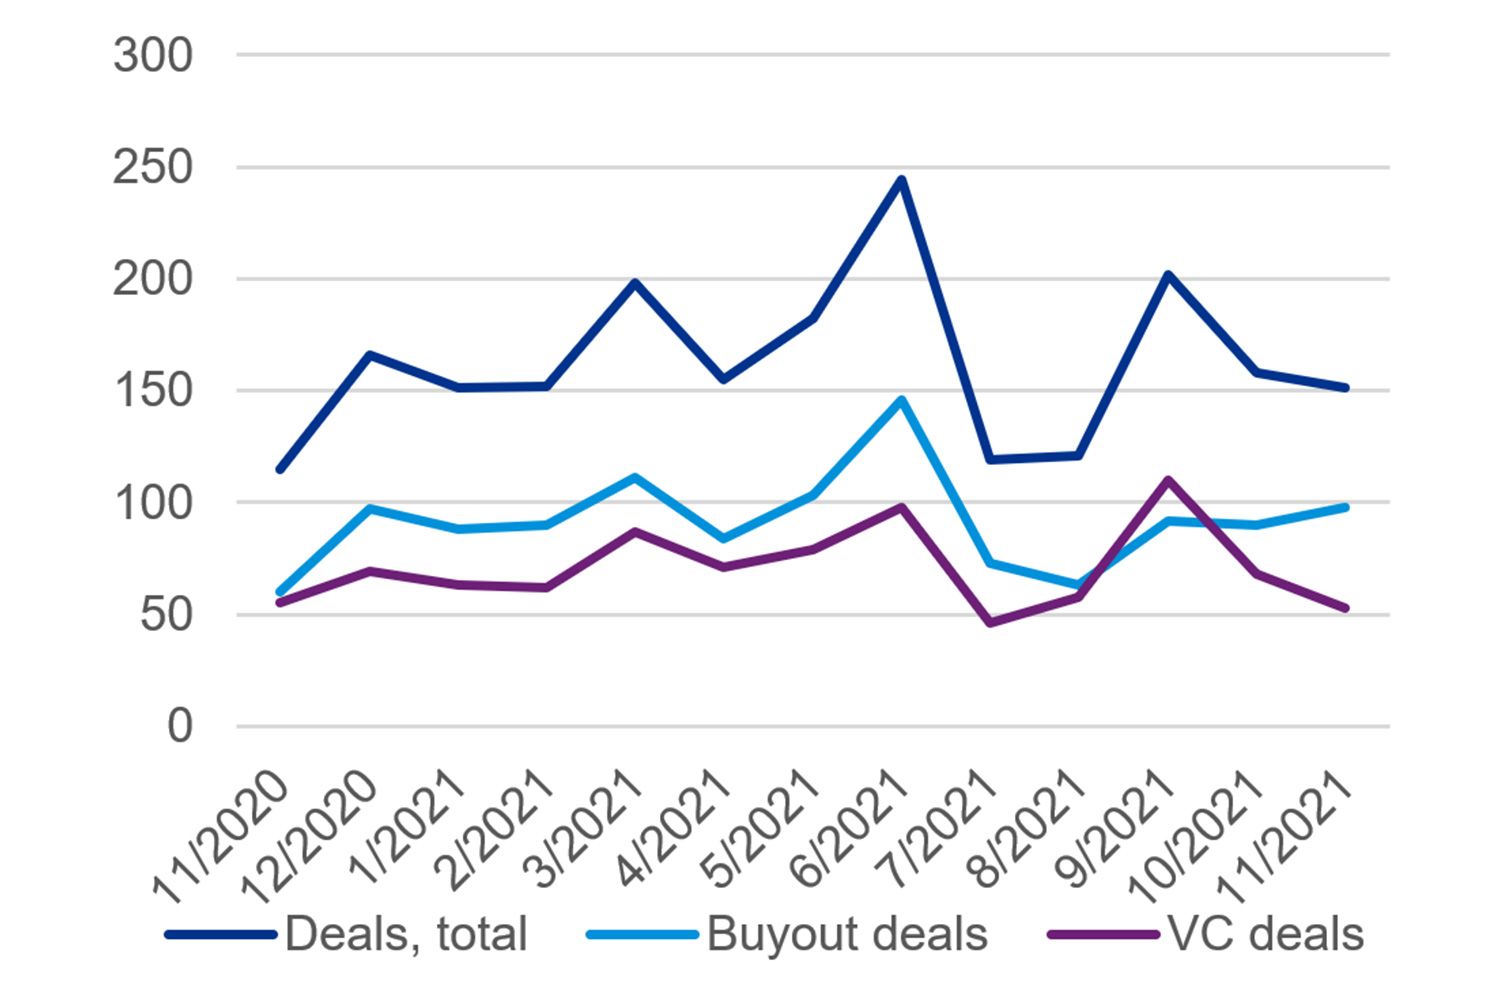 Monthly Nordic Buyout and VC deal volume